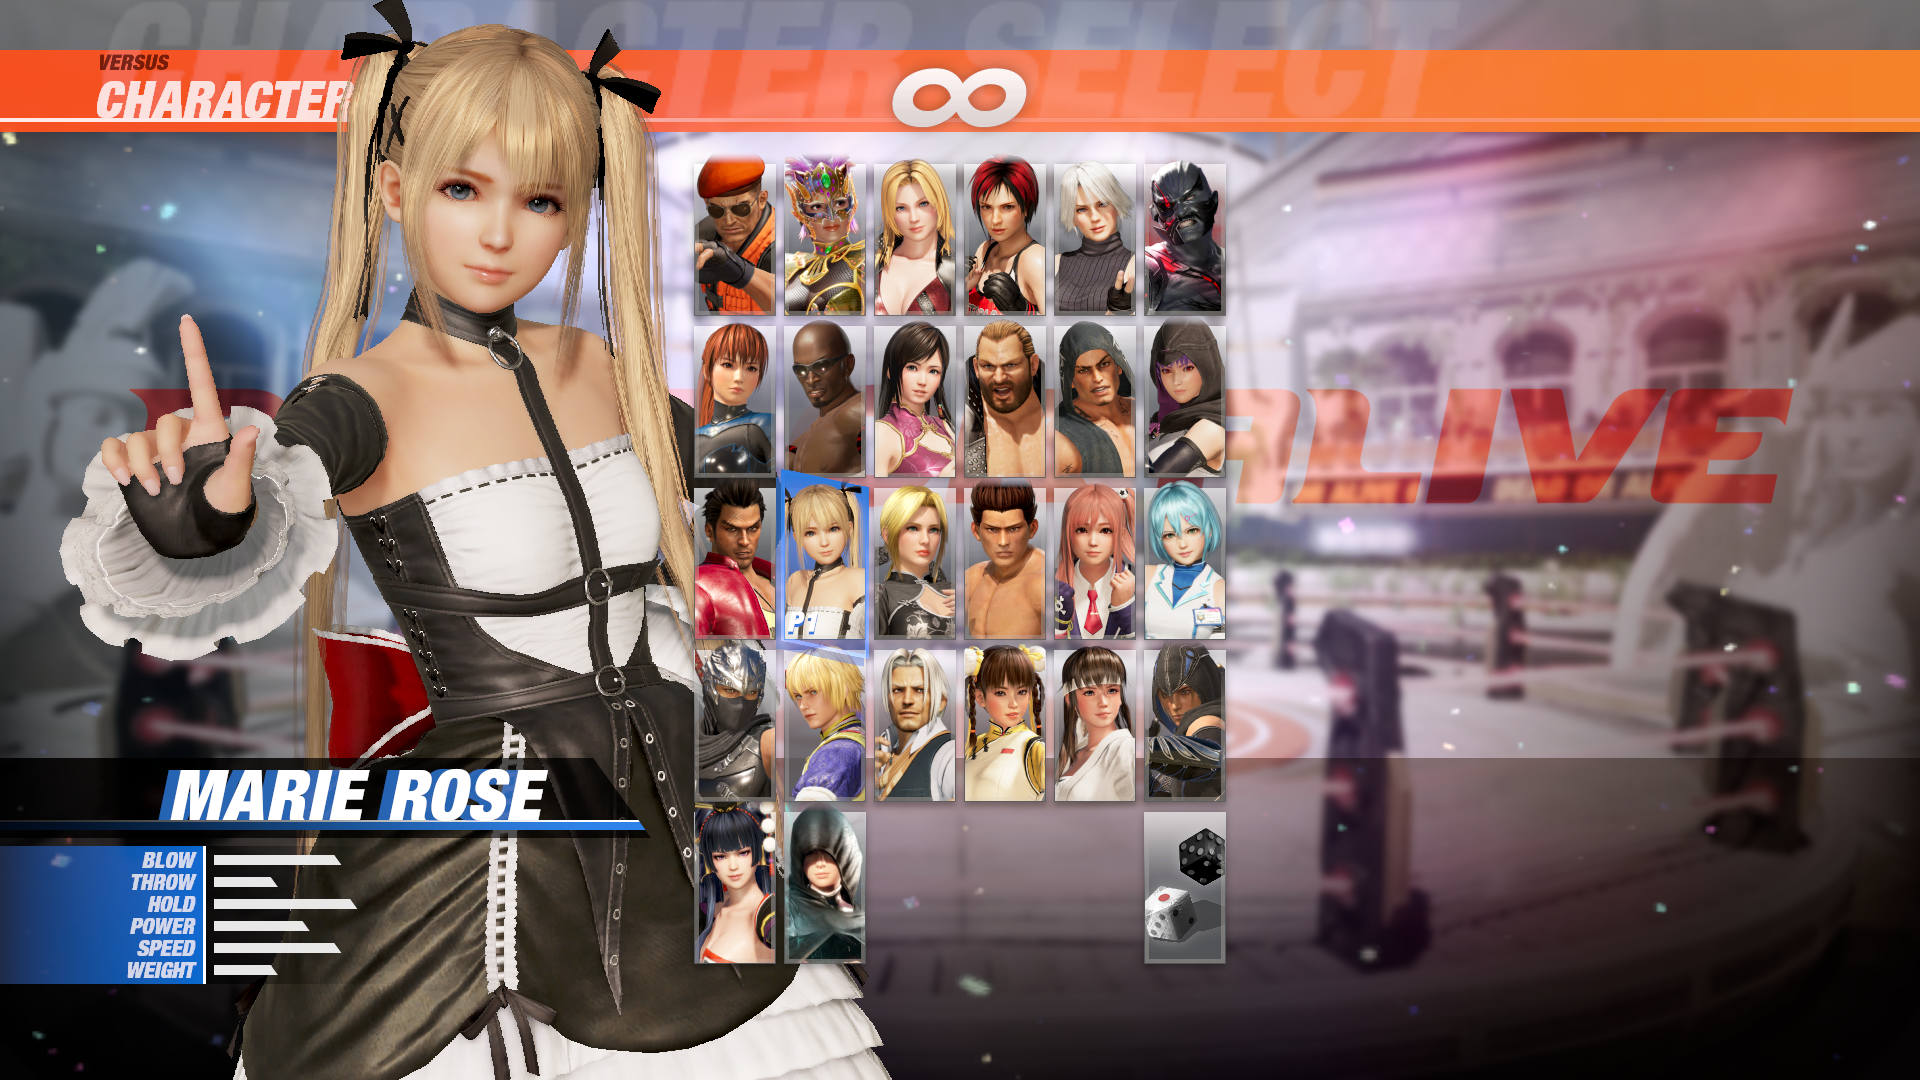 DEAD OR ALIVE 6: Core Fighters - Female Fighters Set Featured Screenshot #1